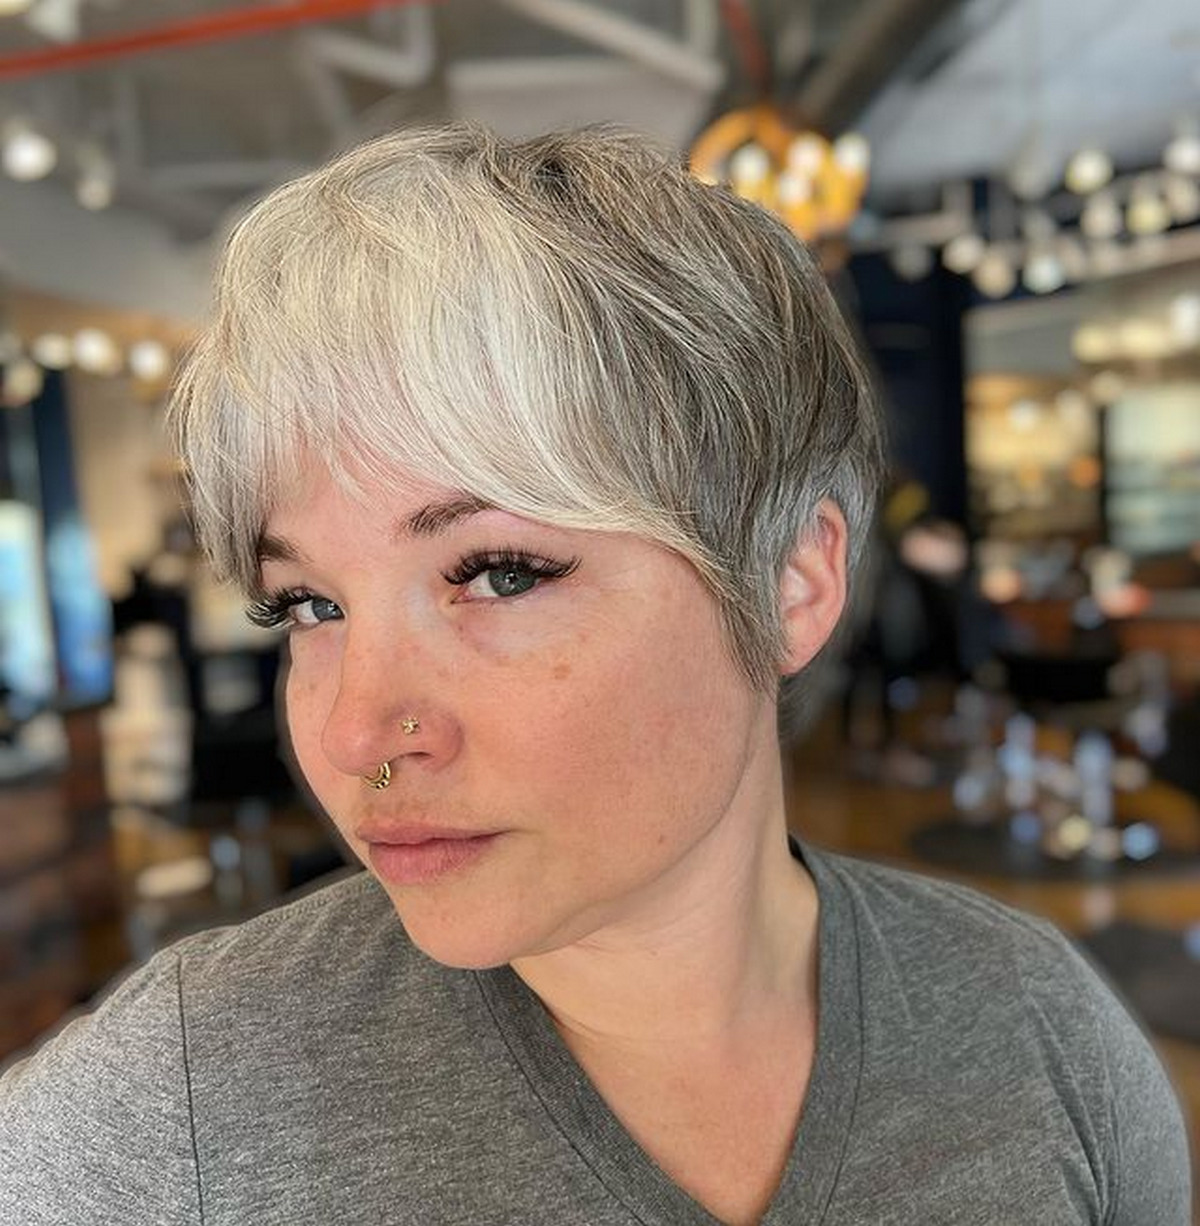 Effortless Curly Mullet With Short Bangs